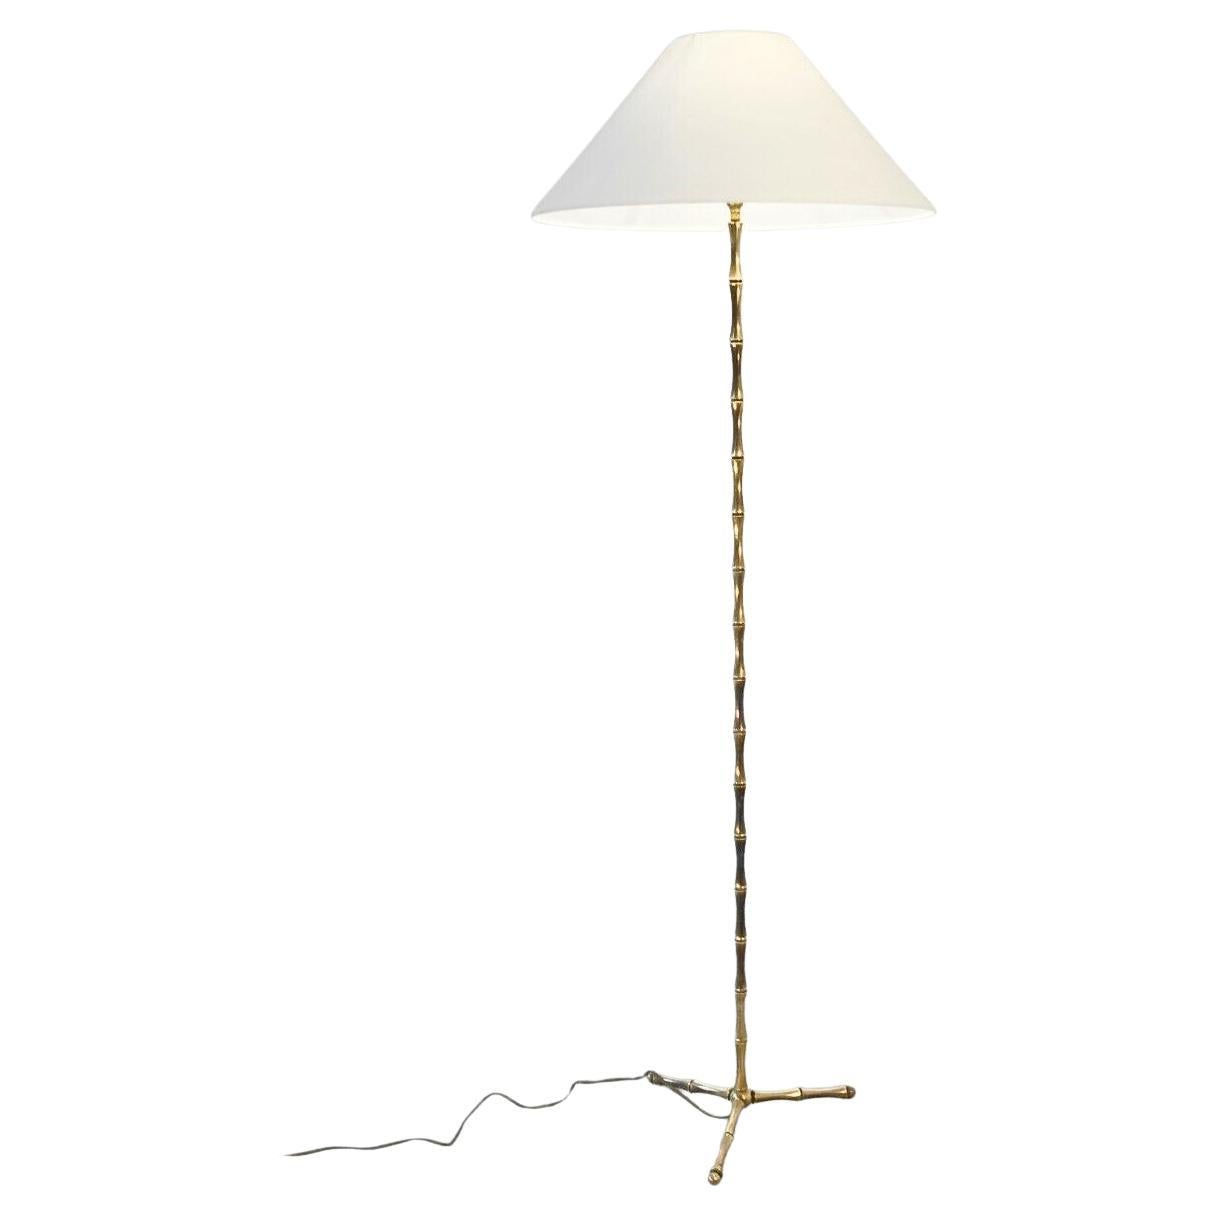 A SHABBY-CHIC NEO-CLASSIC "Bamboo" FLOOR LAMP by MAISON BAGUES, France 1960 For Sale